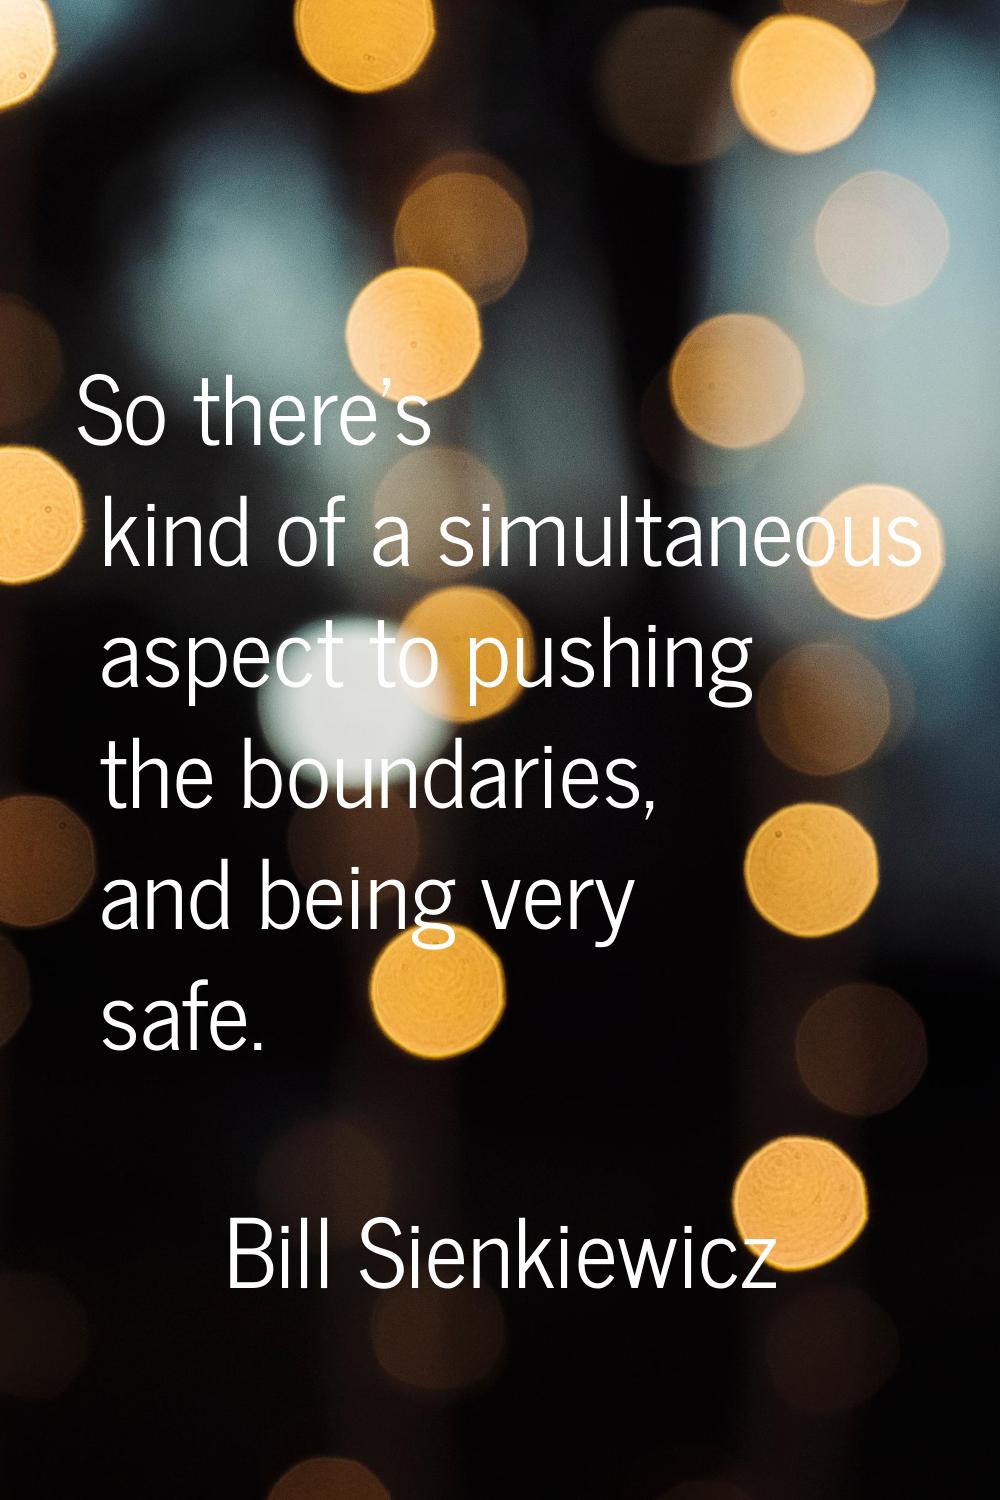 So there's kind of a simultaneous aspect to pushing the boundaries, and being very safe.